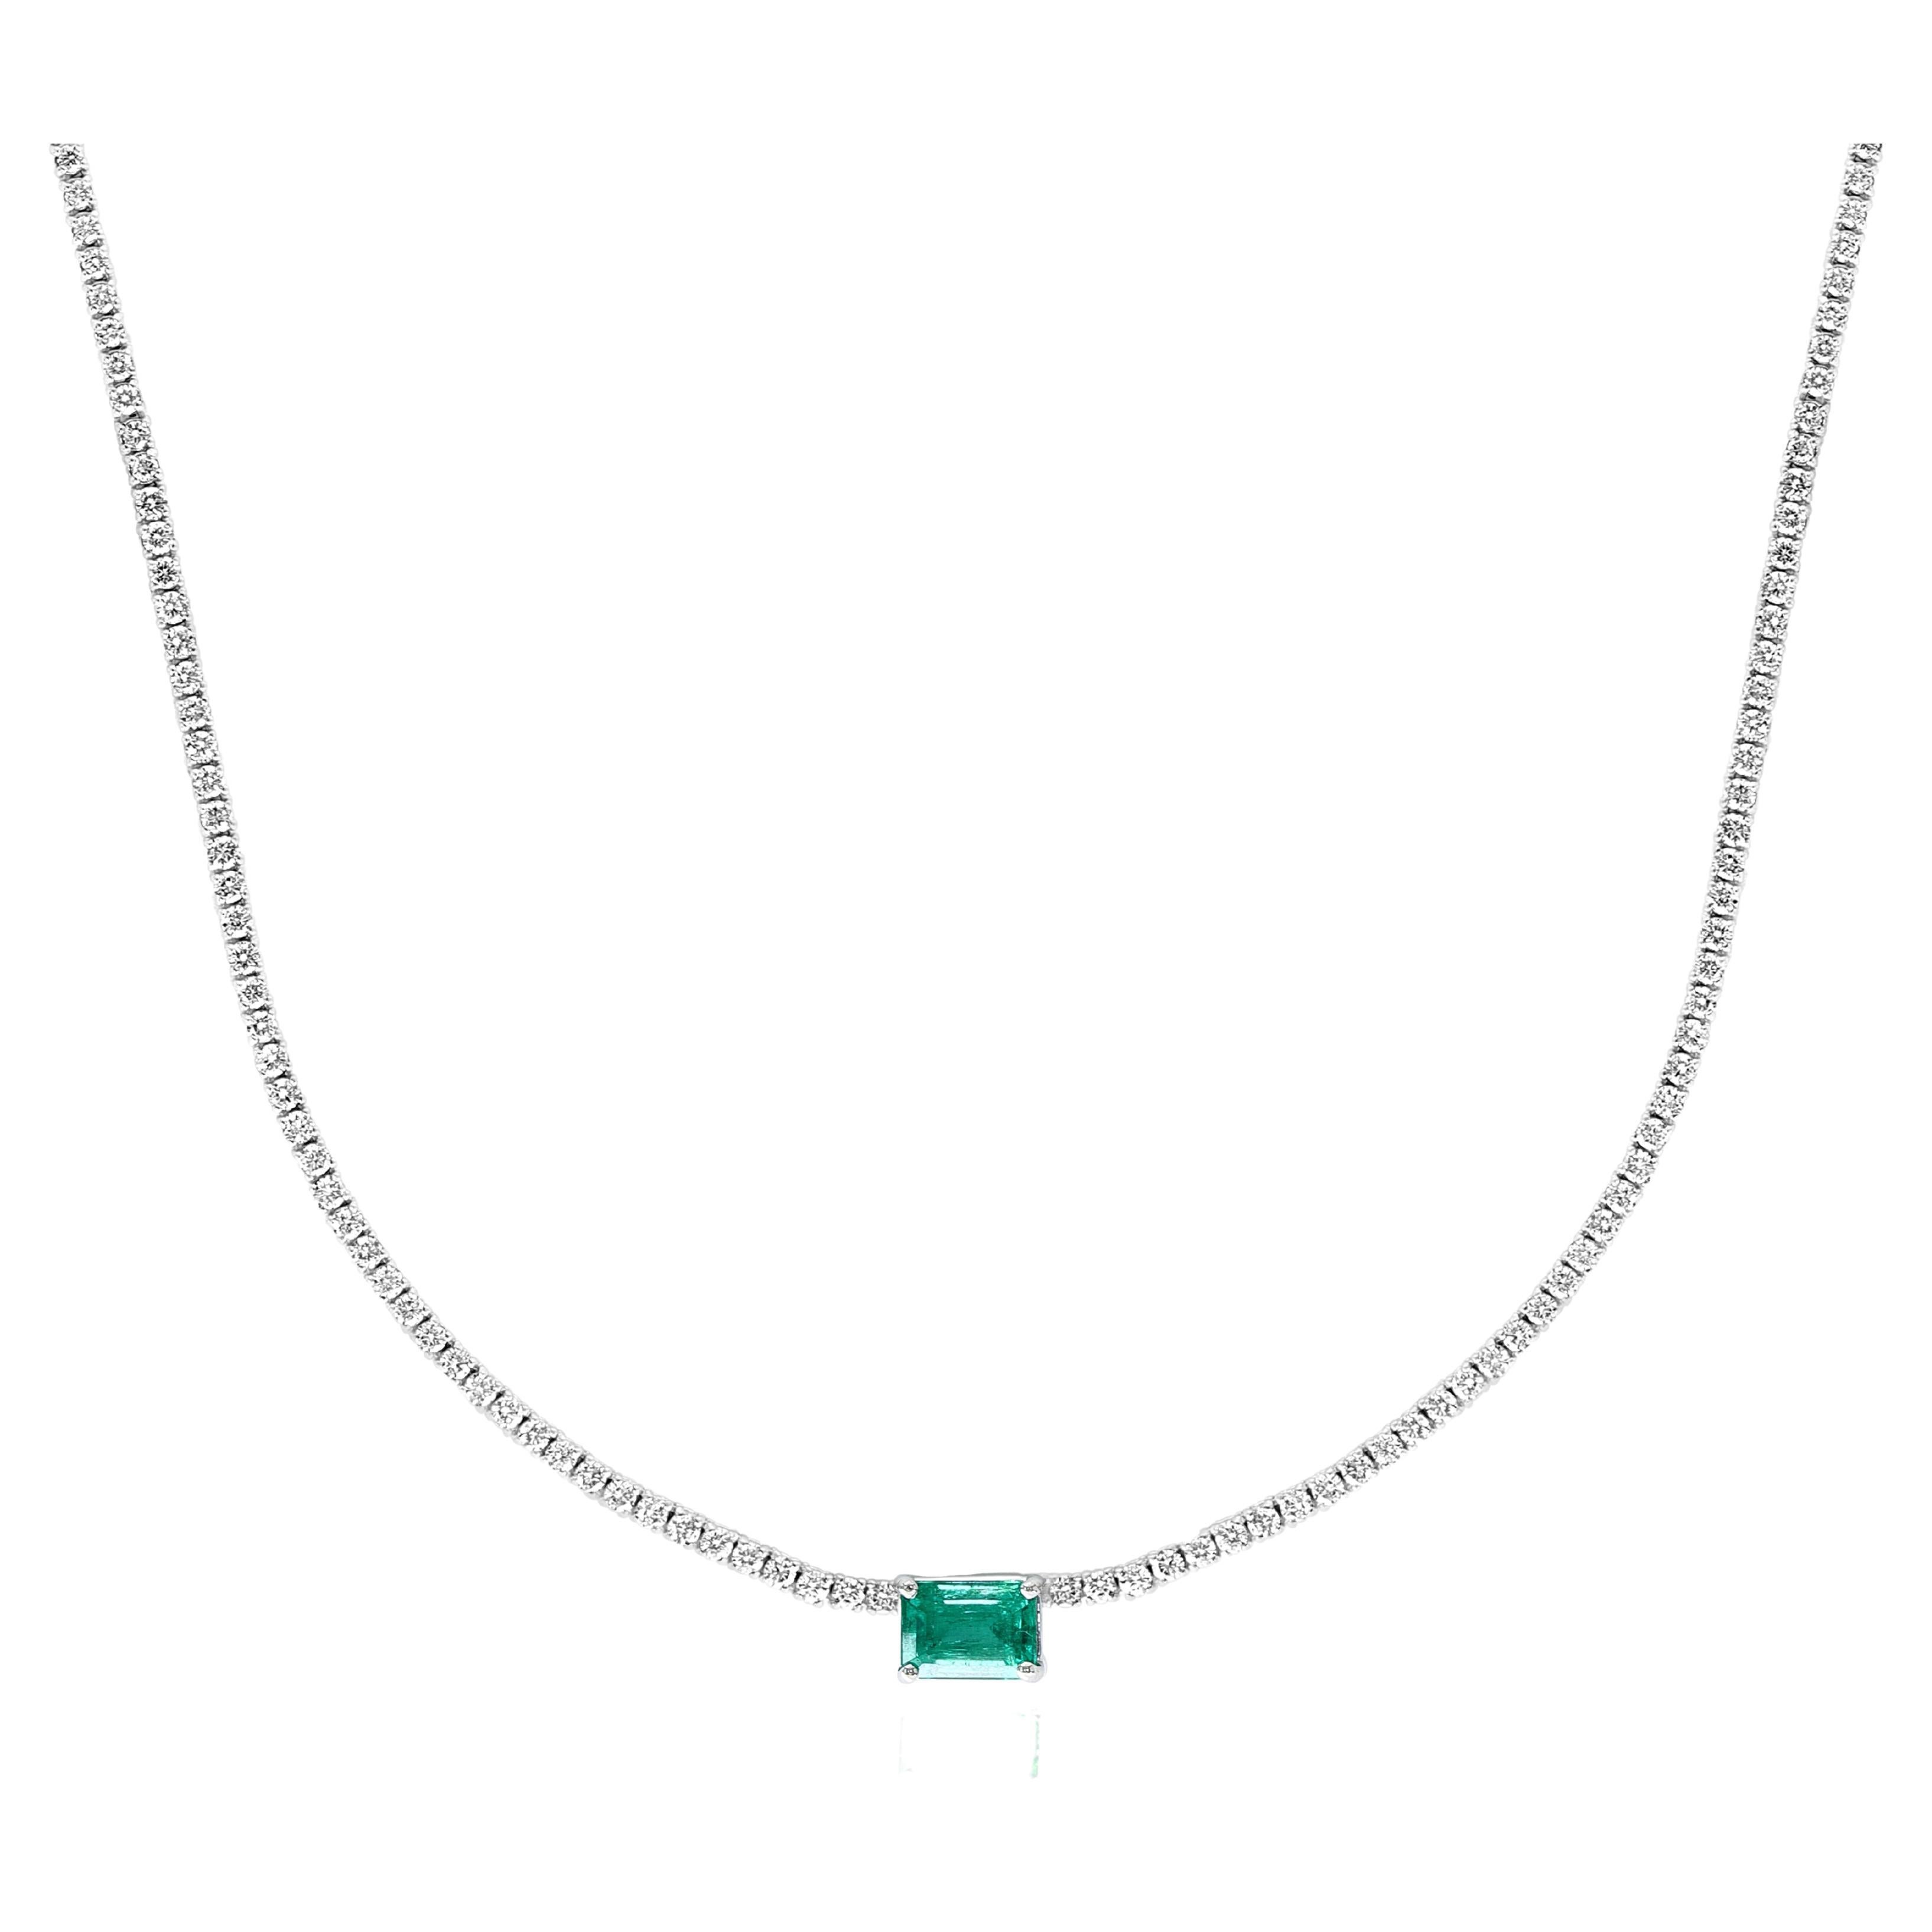 1.88 Carat Emerald Cut Emerald and Diamond Tennis Necklace in 14k White Gold